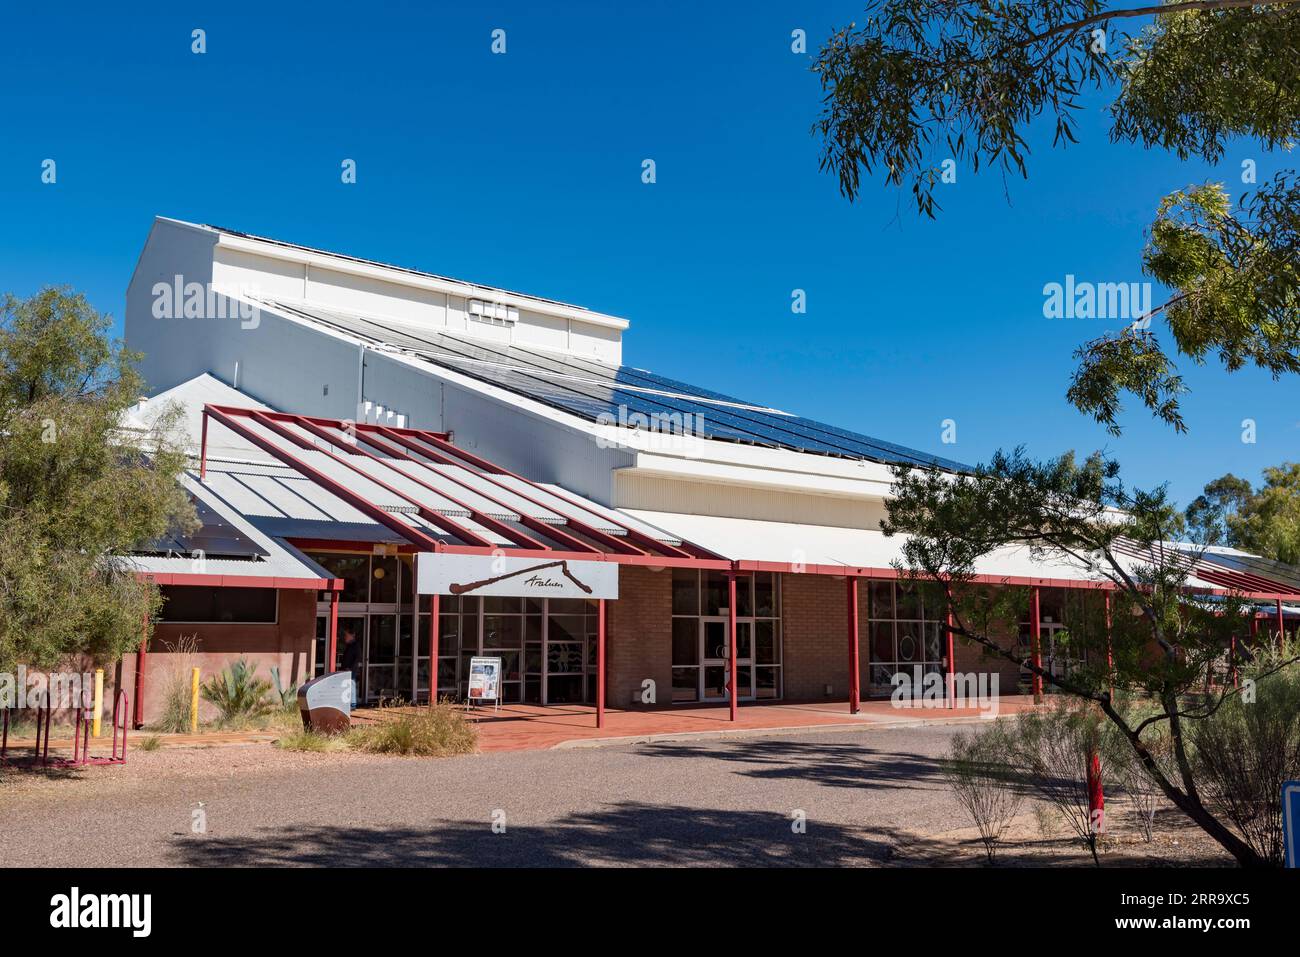 Solar panels on the roof of the Araluen Arts Centre near Alice Springs (Mparntwe) in the Northern Territory, Australia Stock Photo